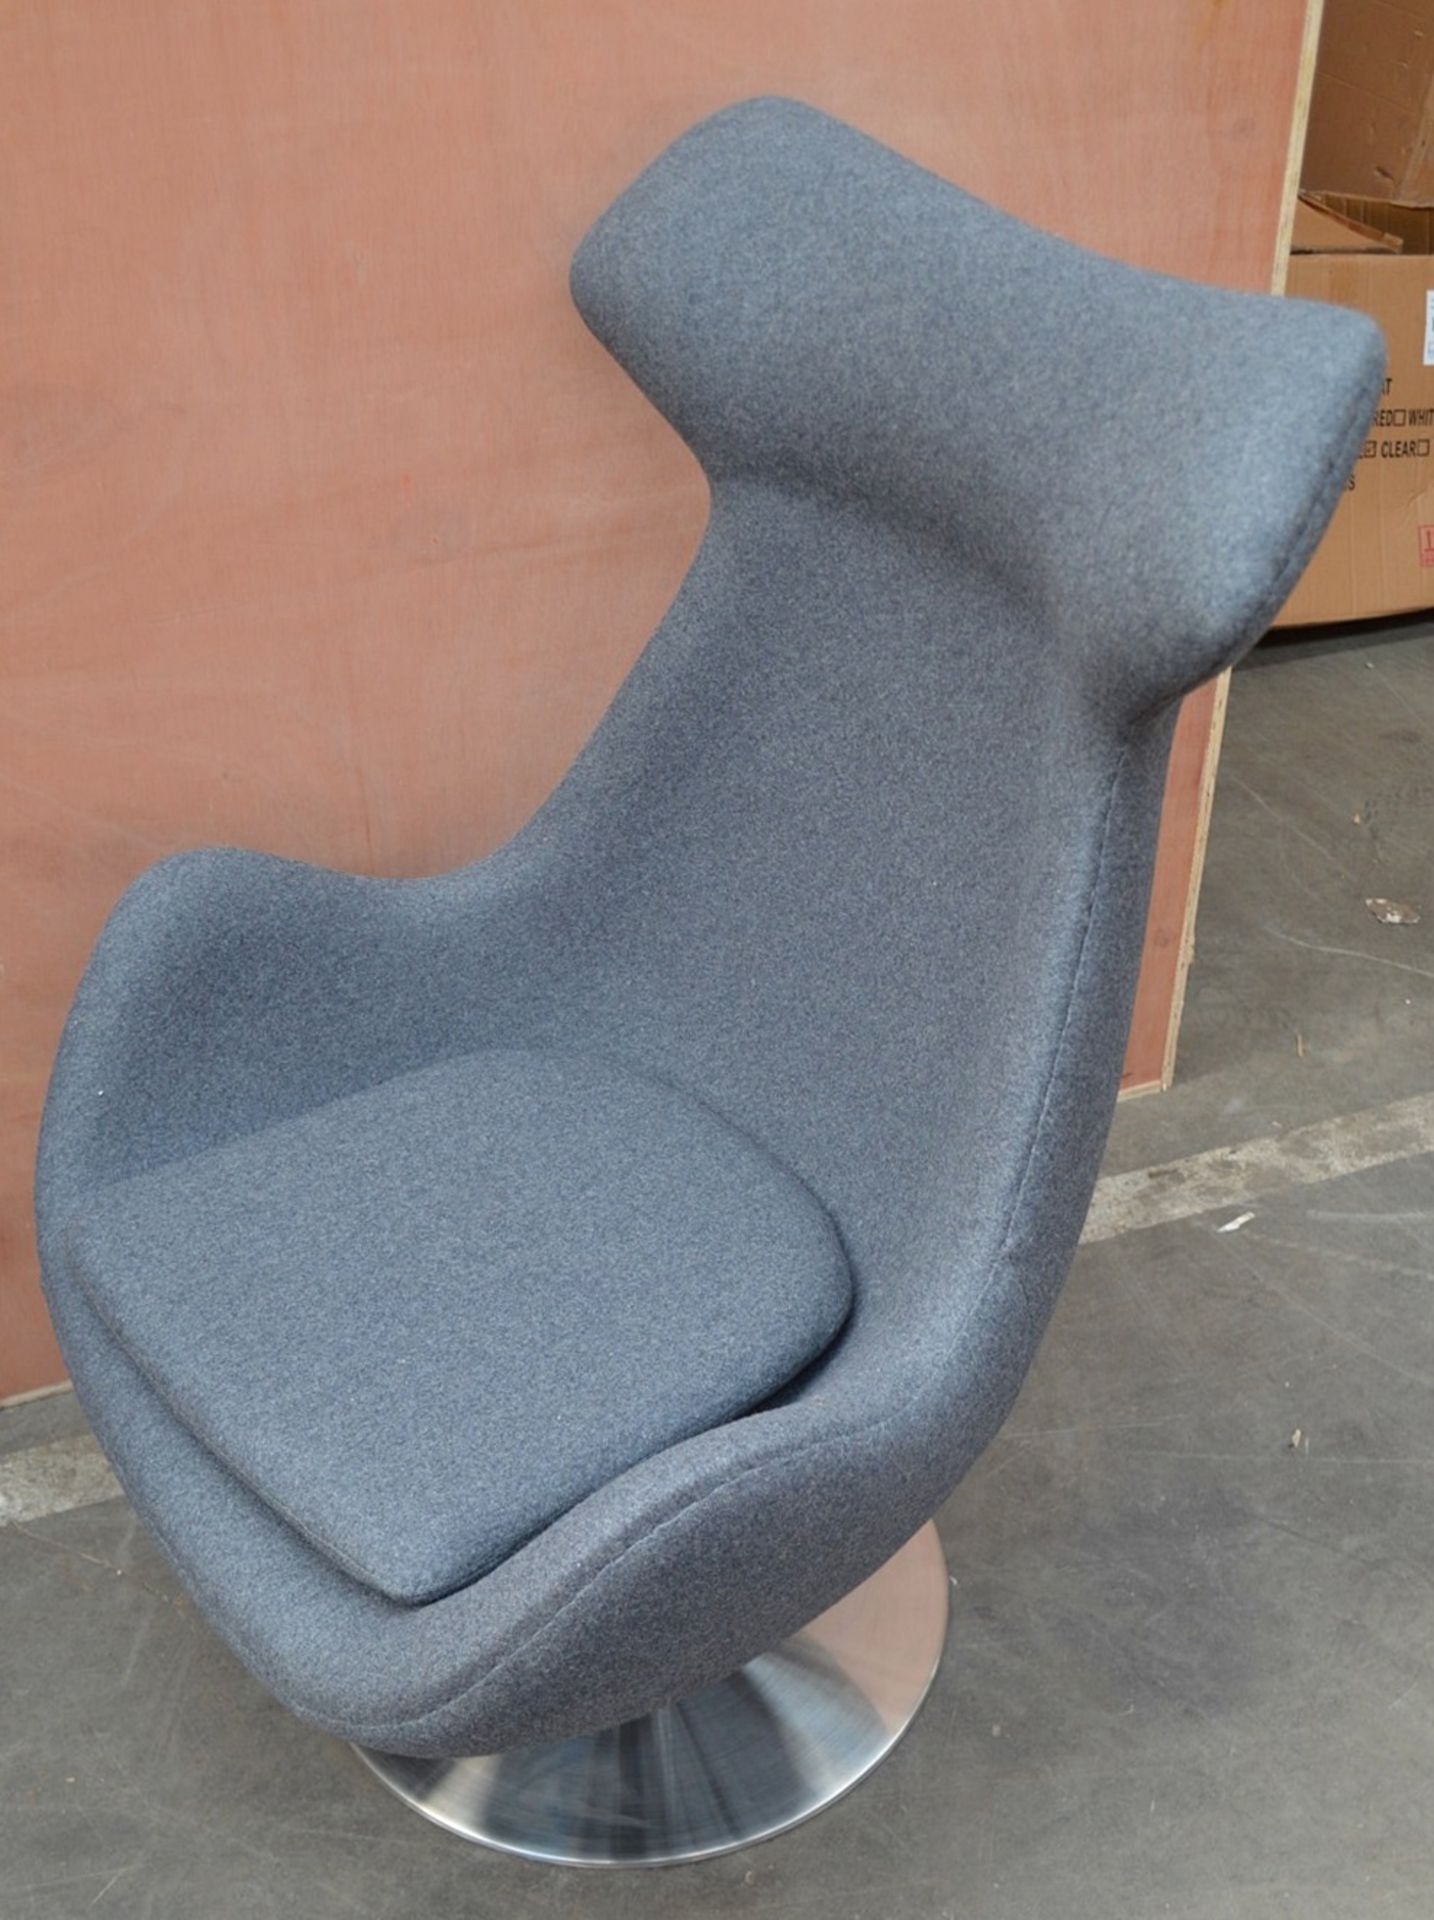 1 x Arne Jacobsen-Inspired Egg Lounge Chair - Upholstered In Grey Cashmere With Steel Base - Image 8 of 13